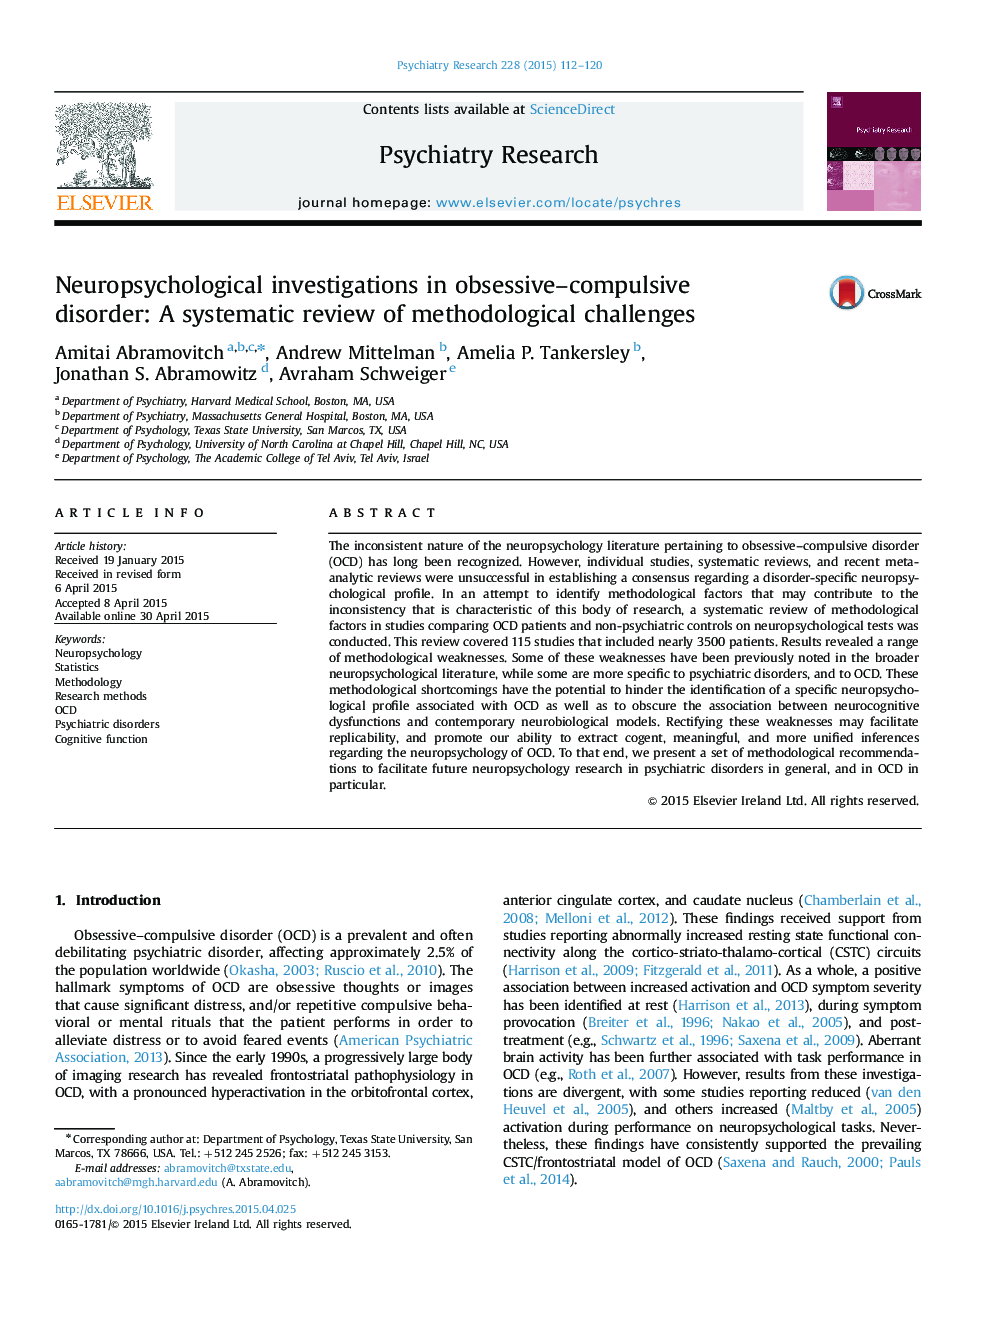 Neuropsychological investigations in obsessive–compulsive disorder: A systematic review of methodological challenges